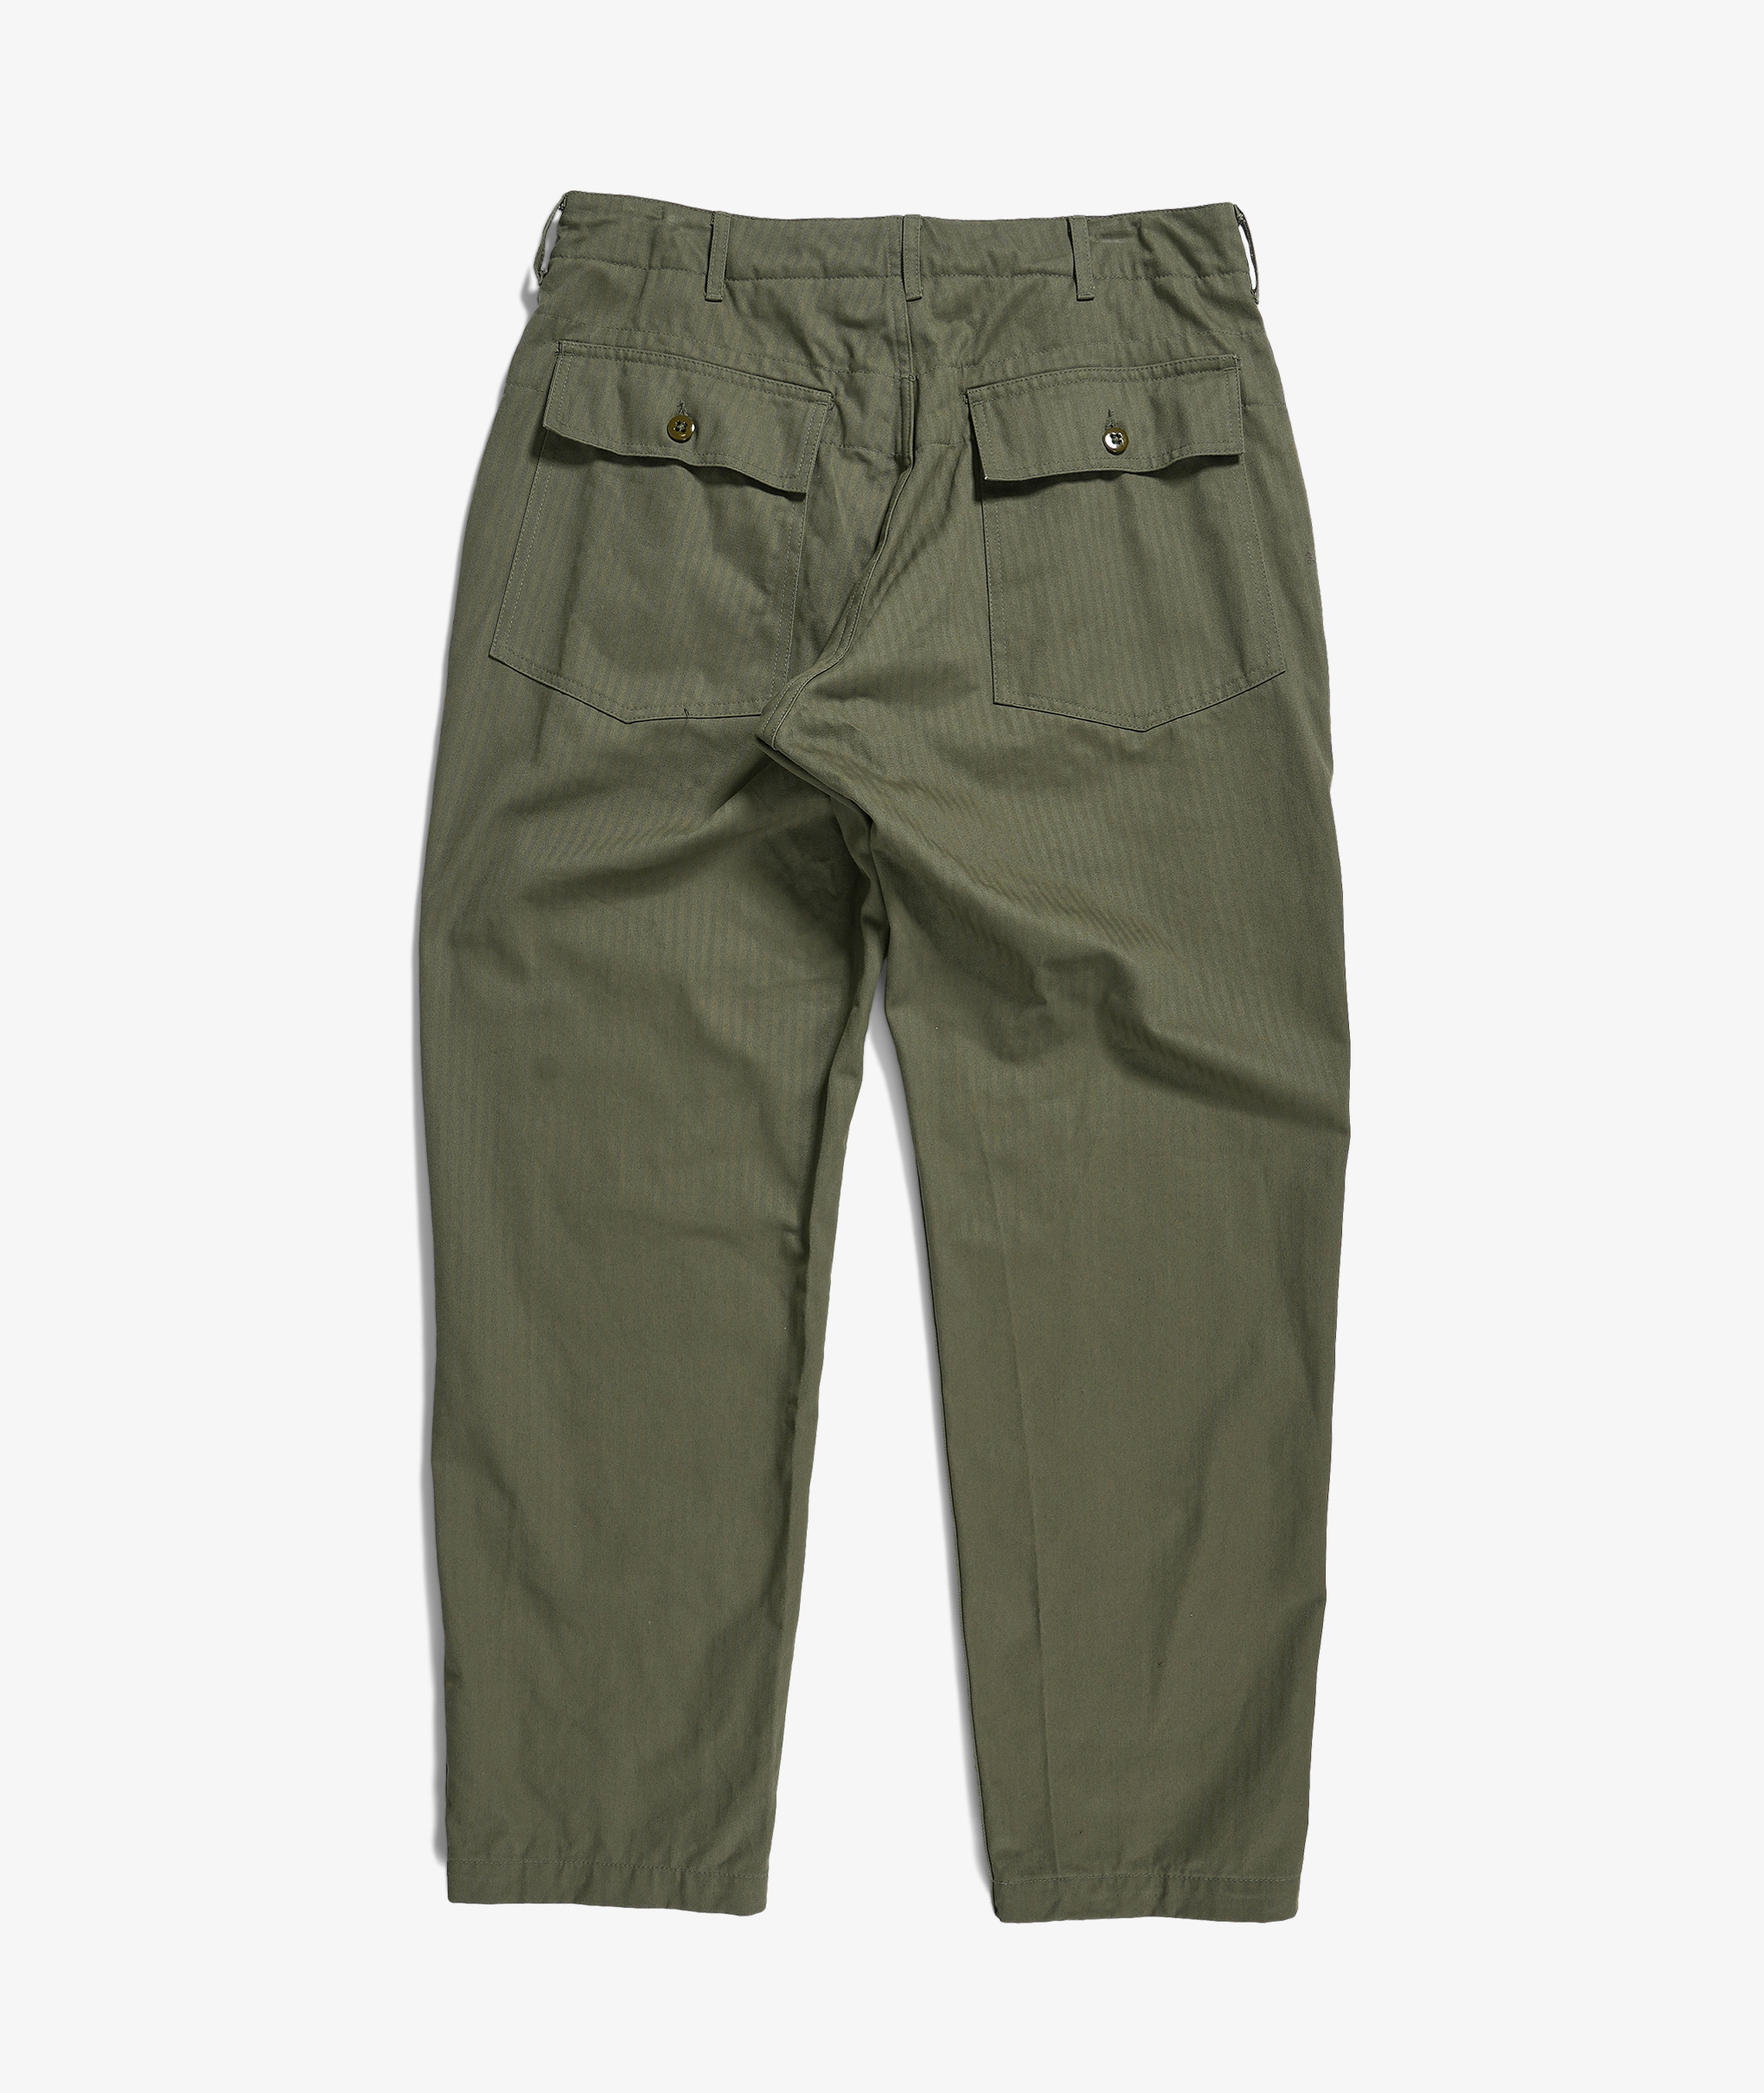 Norse Store | Shipping Worldwide - Engineered Garments Fatigue Pant - Olive